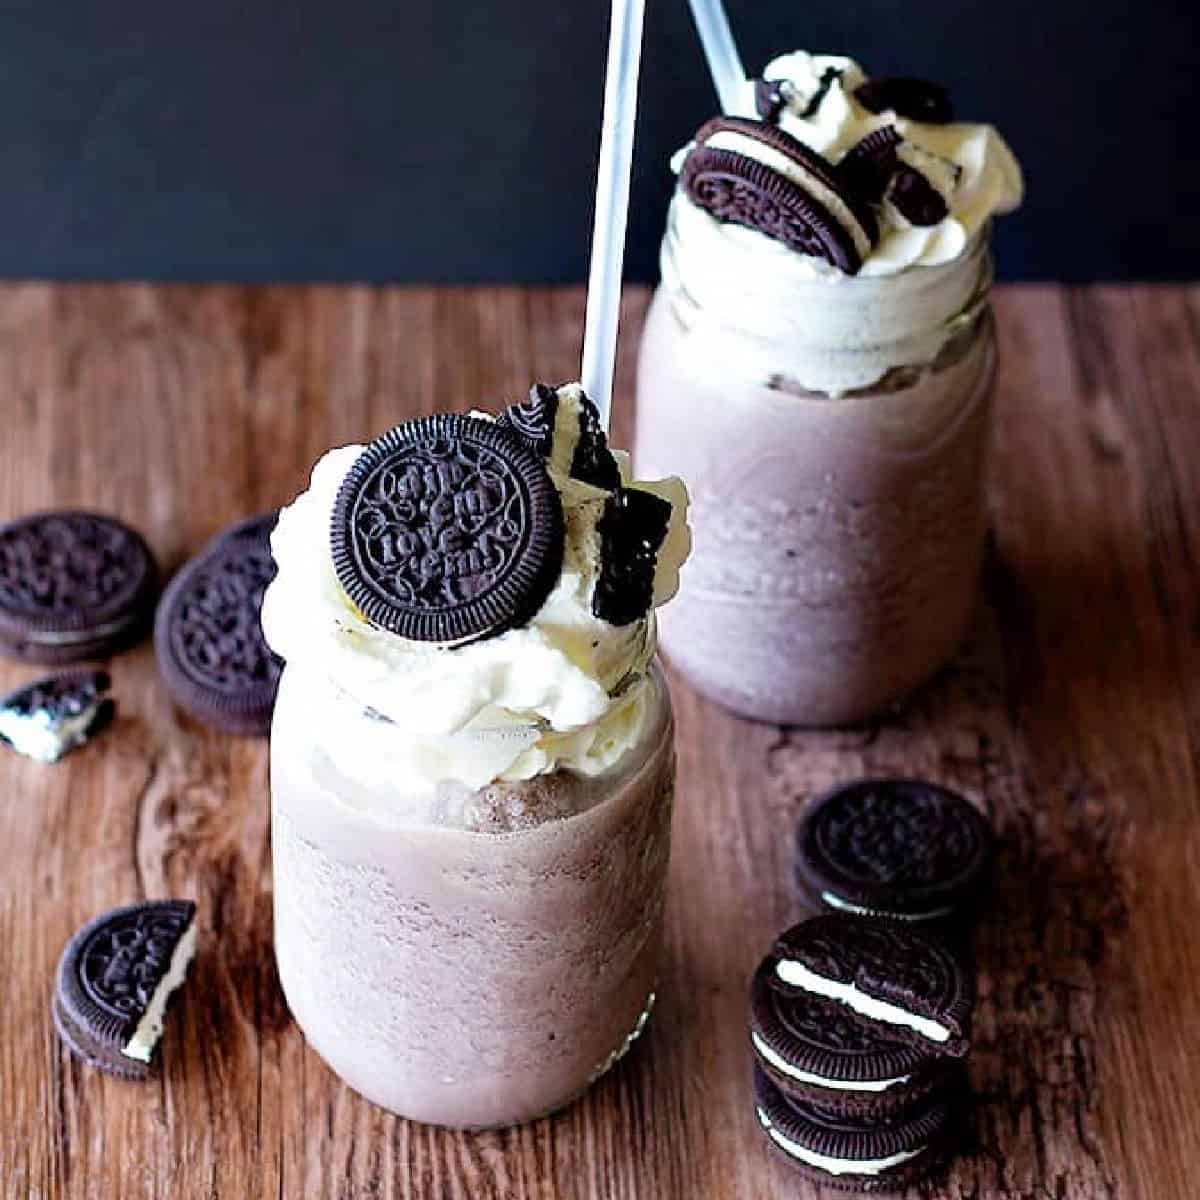 Make your day special with this quick and delicious Oreo Iced Coffee recipe.